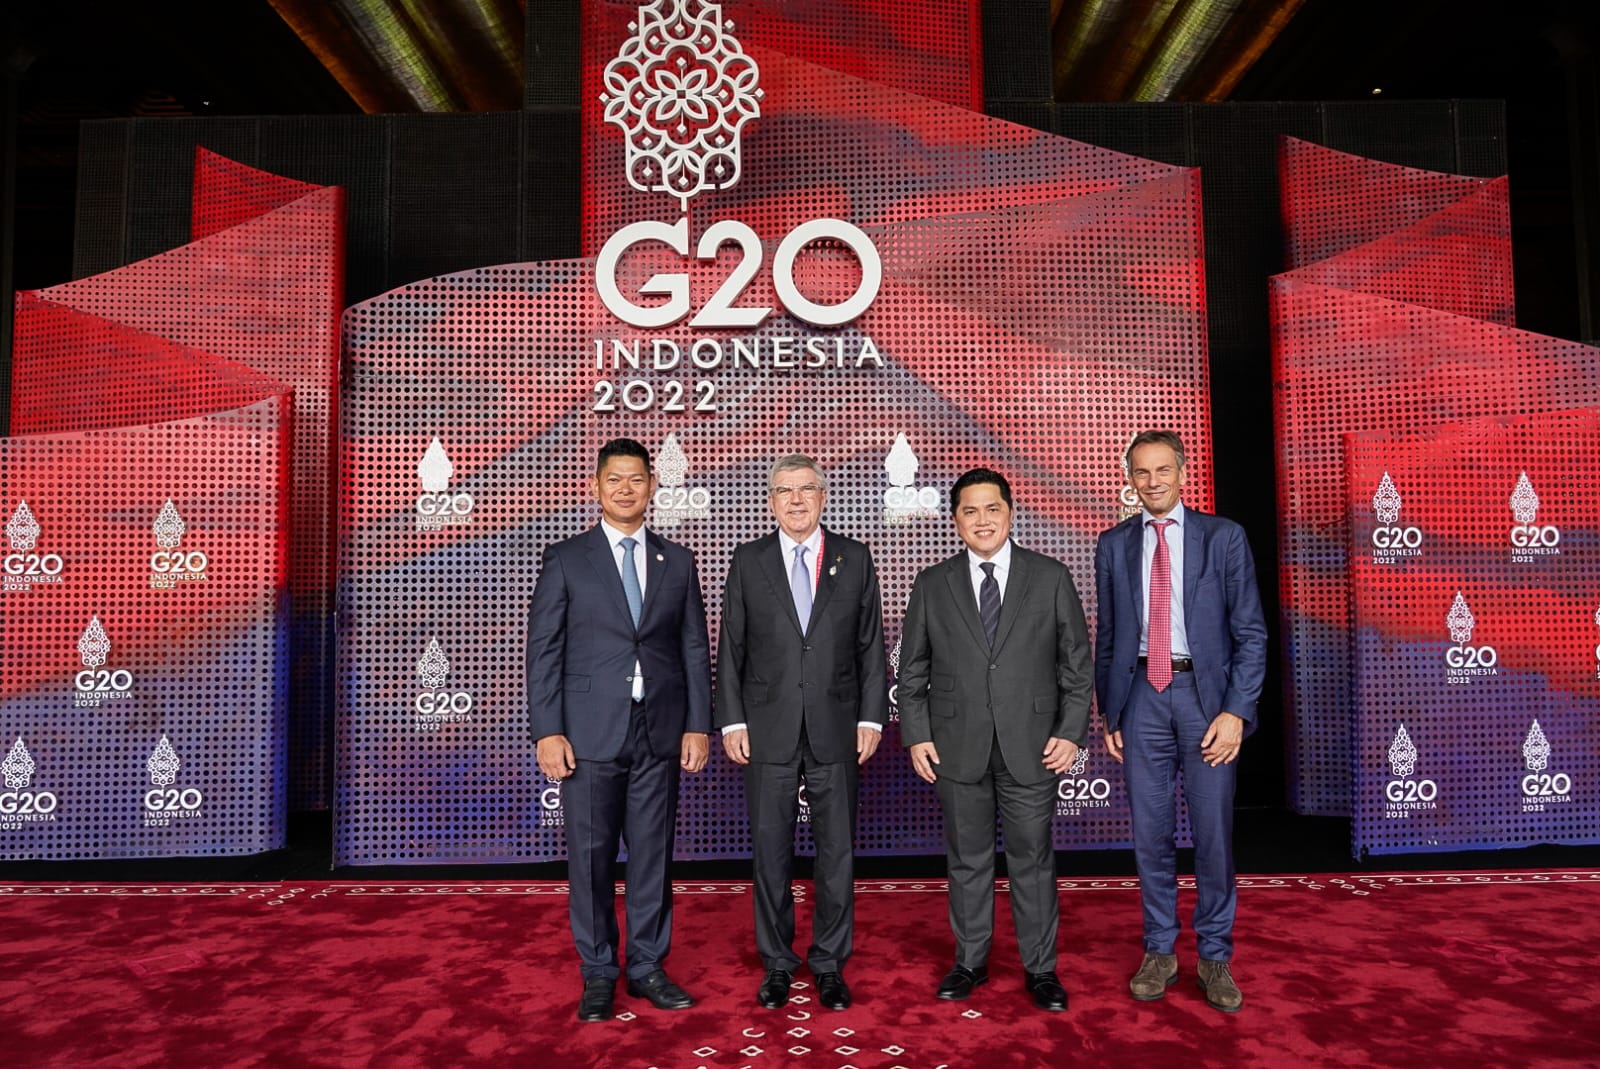 Indonesia proposes Nusantara Capital City for 2036 Olympics and Paralympics Bidding - Indonesia Olympic Commitee